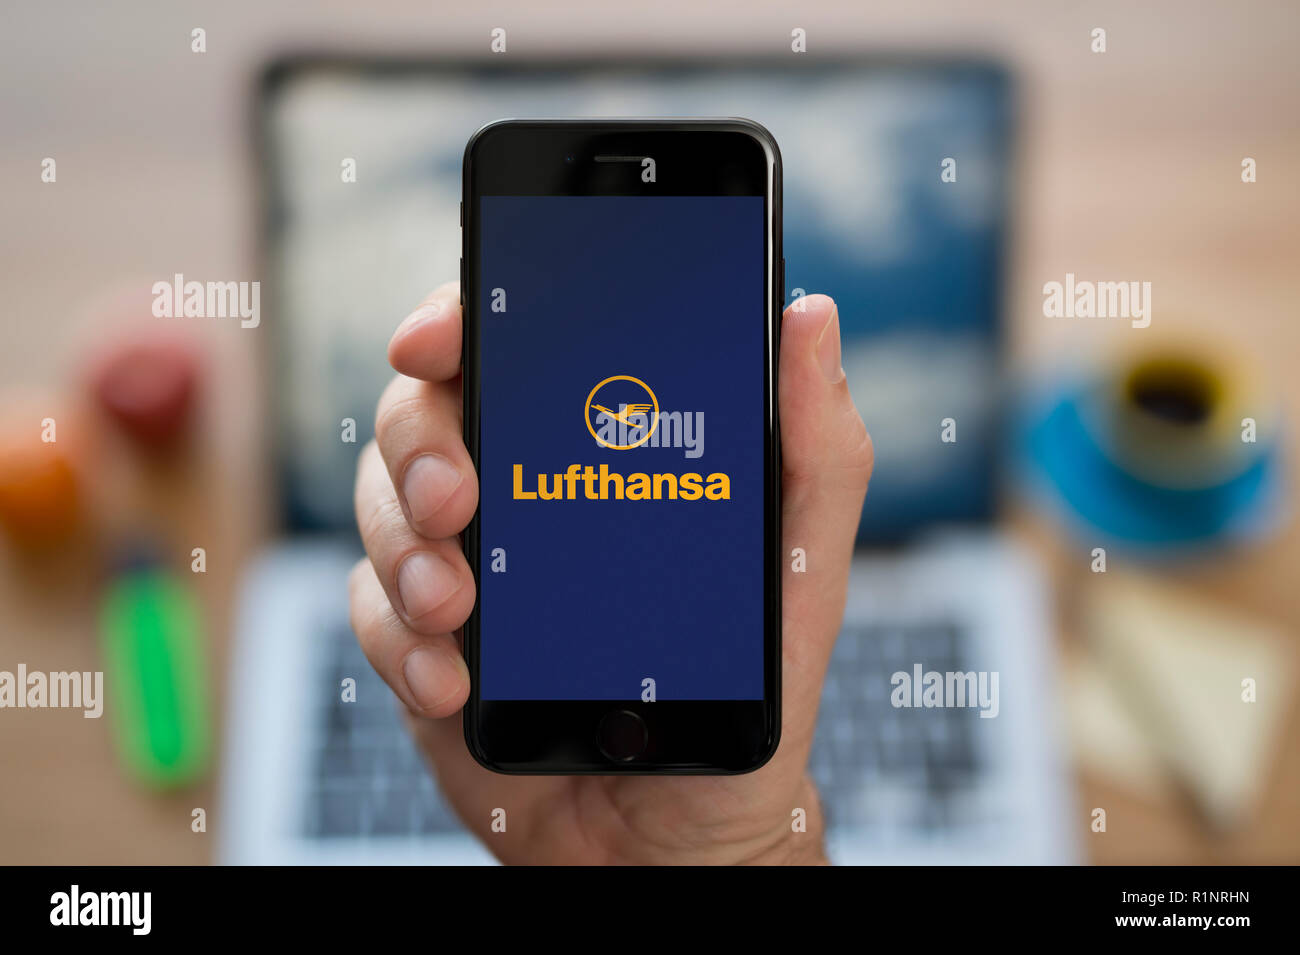 A man looks at his iPhone which displays the Lufthansa logo, while sat at his computer desk (Editorial use only). Stock Photo